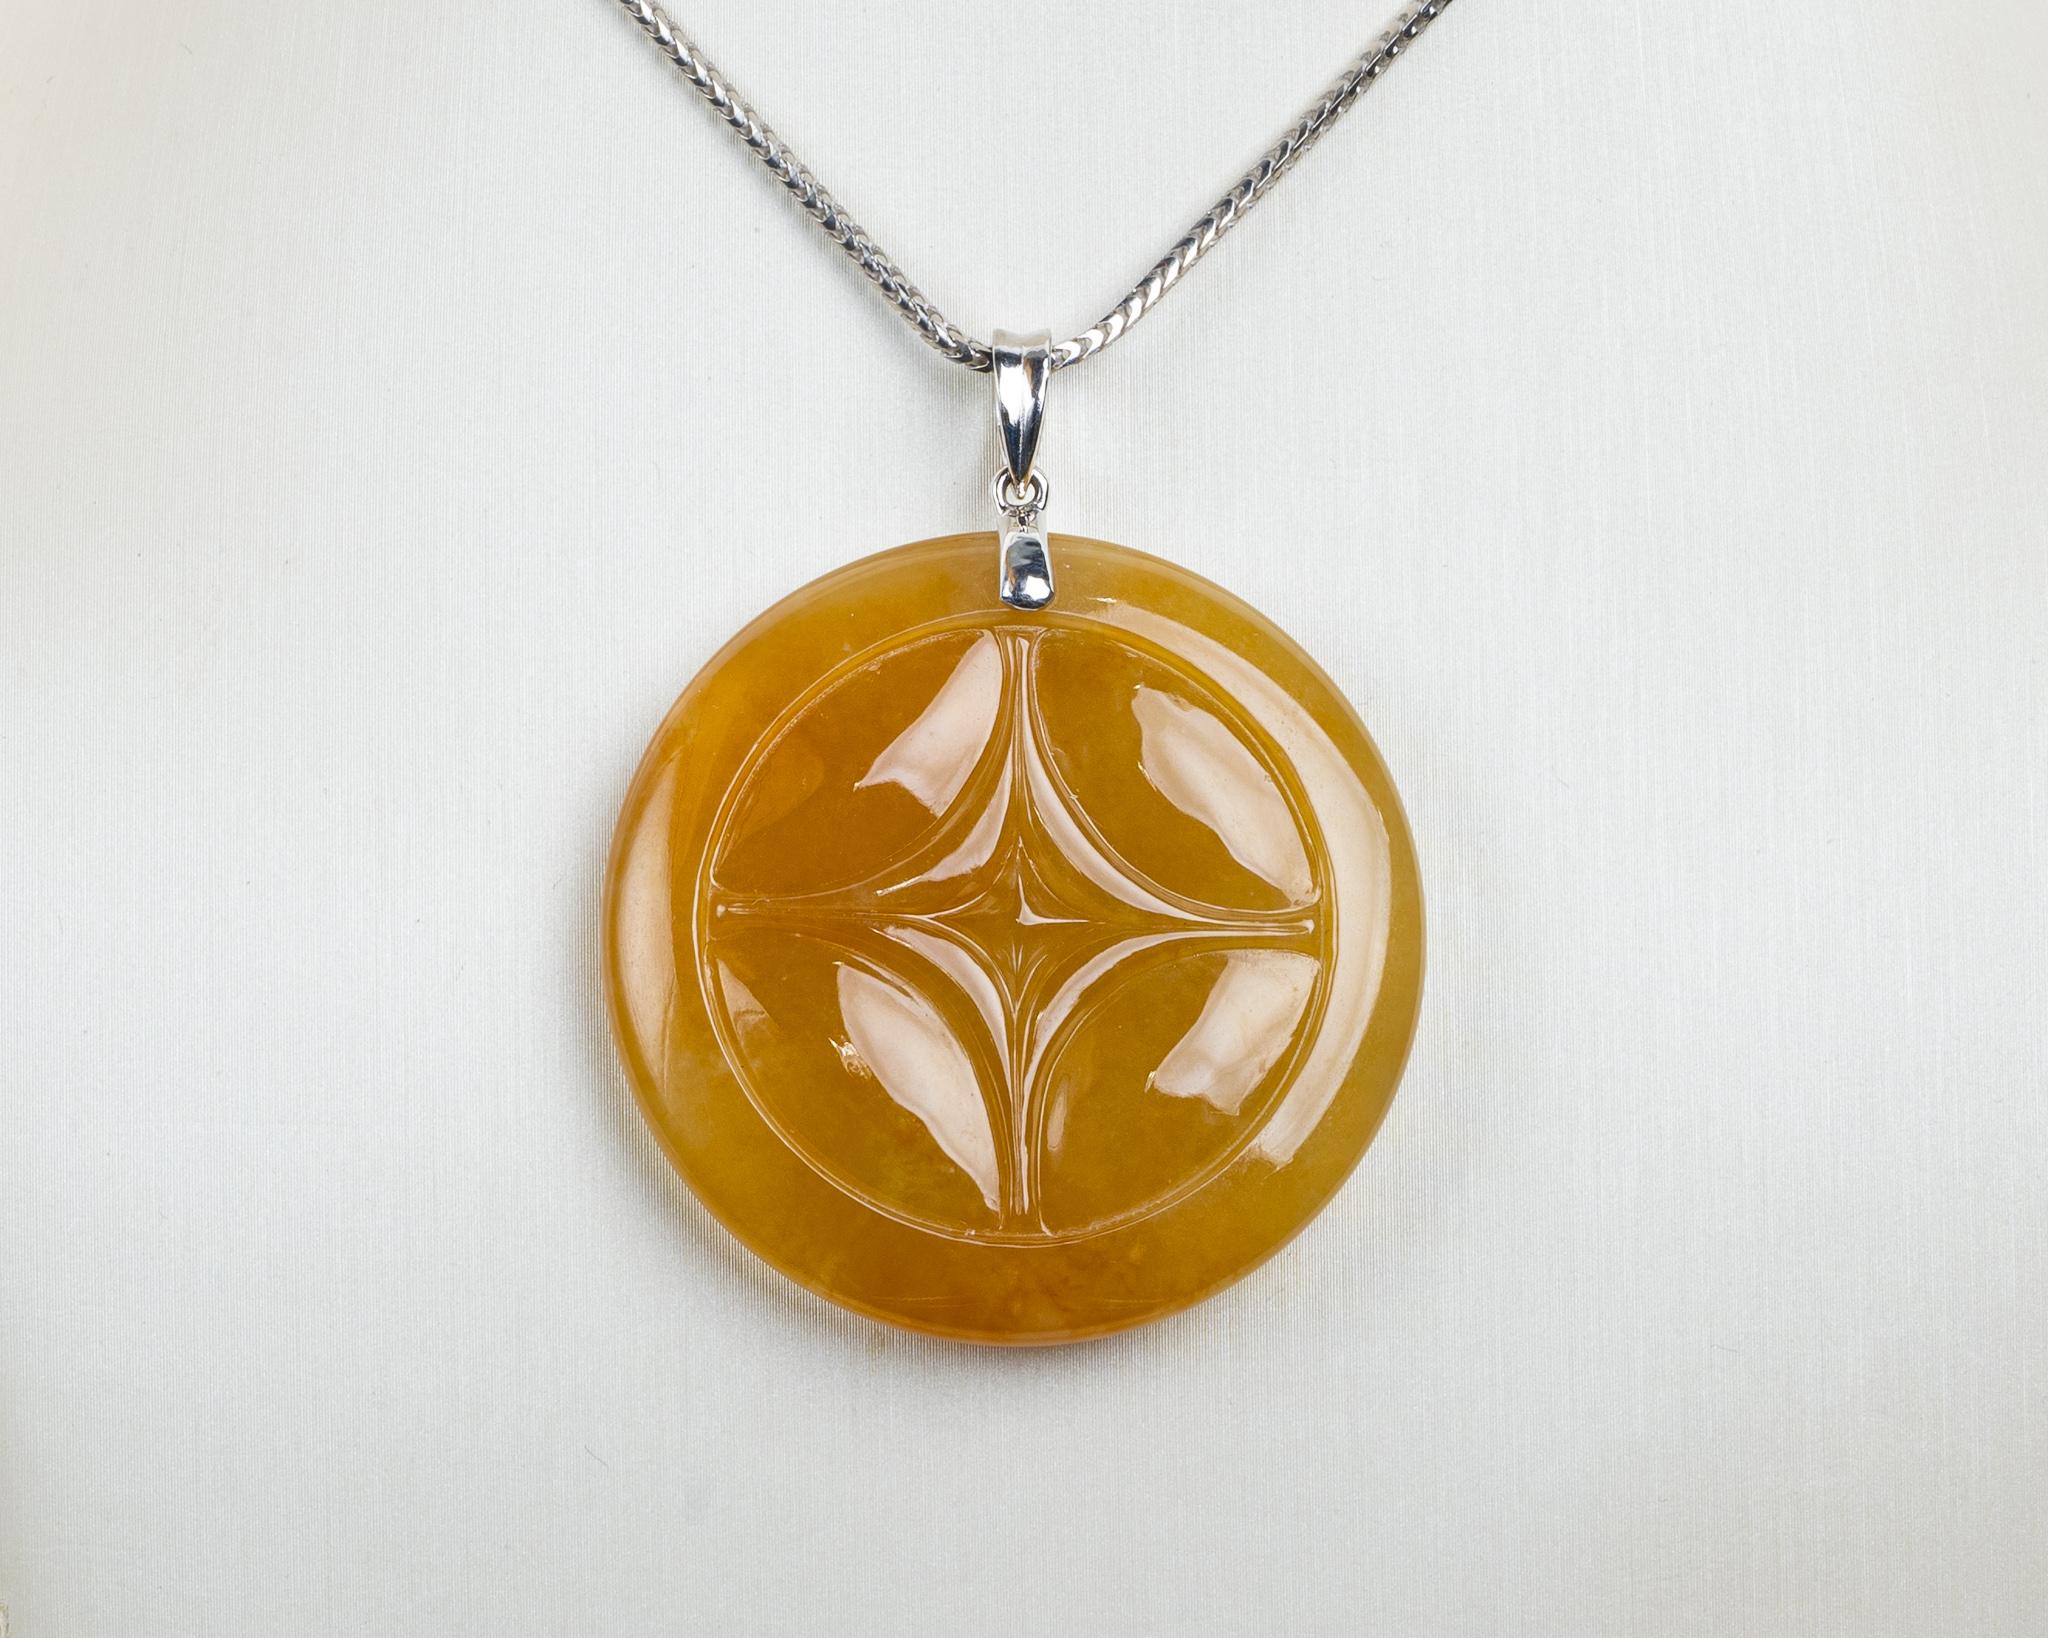 Rough Cut Yellow Jadeite Jade Gold Coin Pendant, Certified Untreated